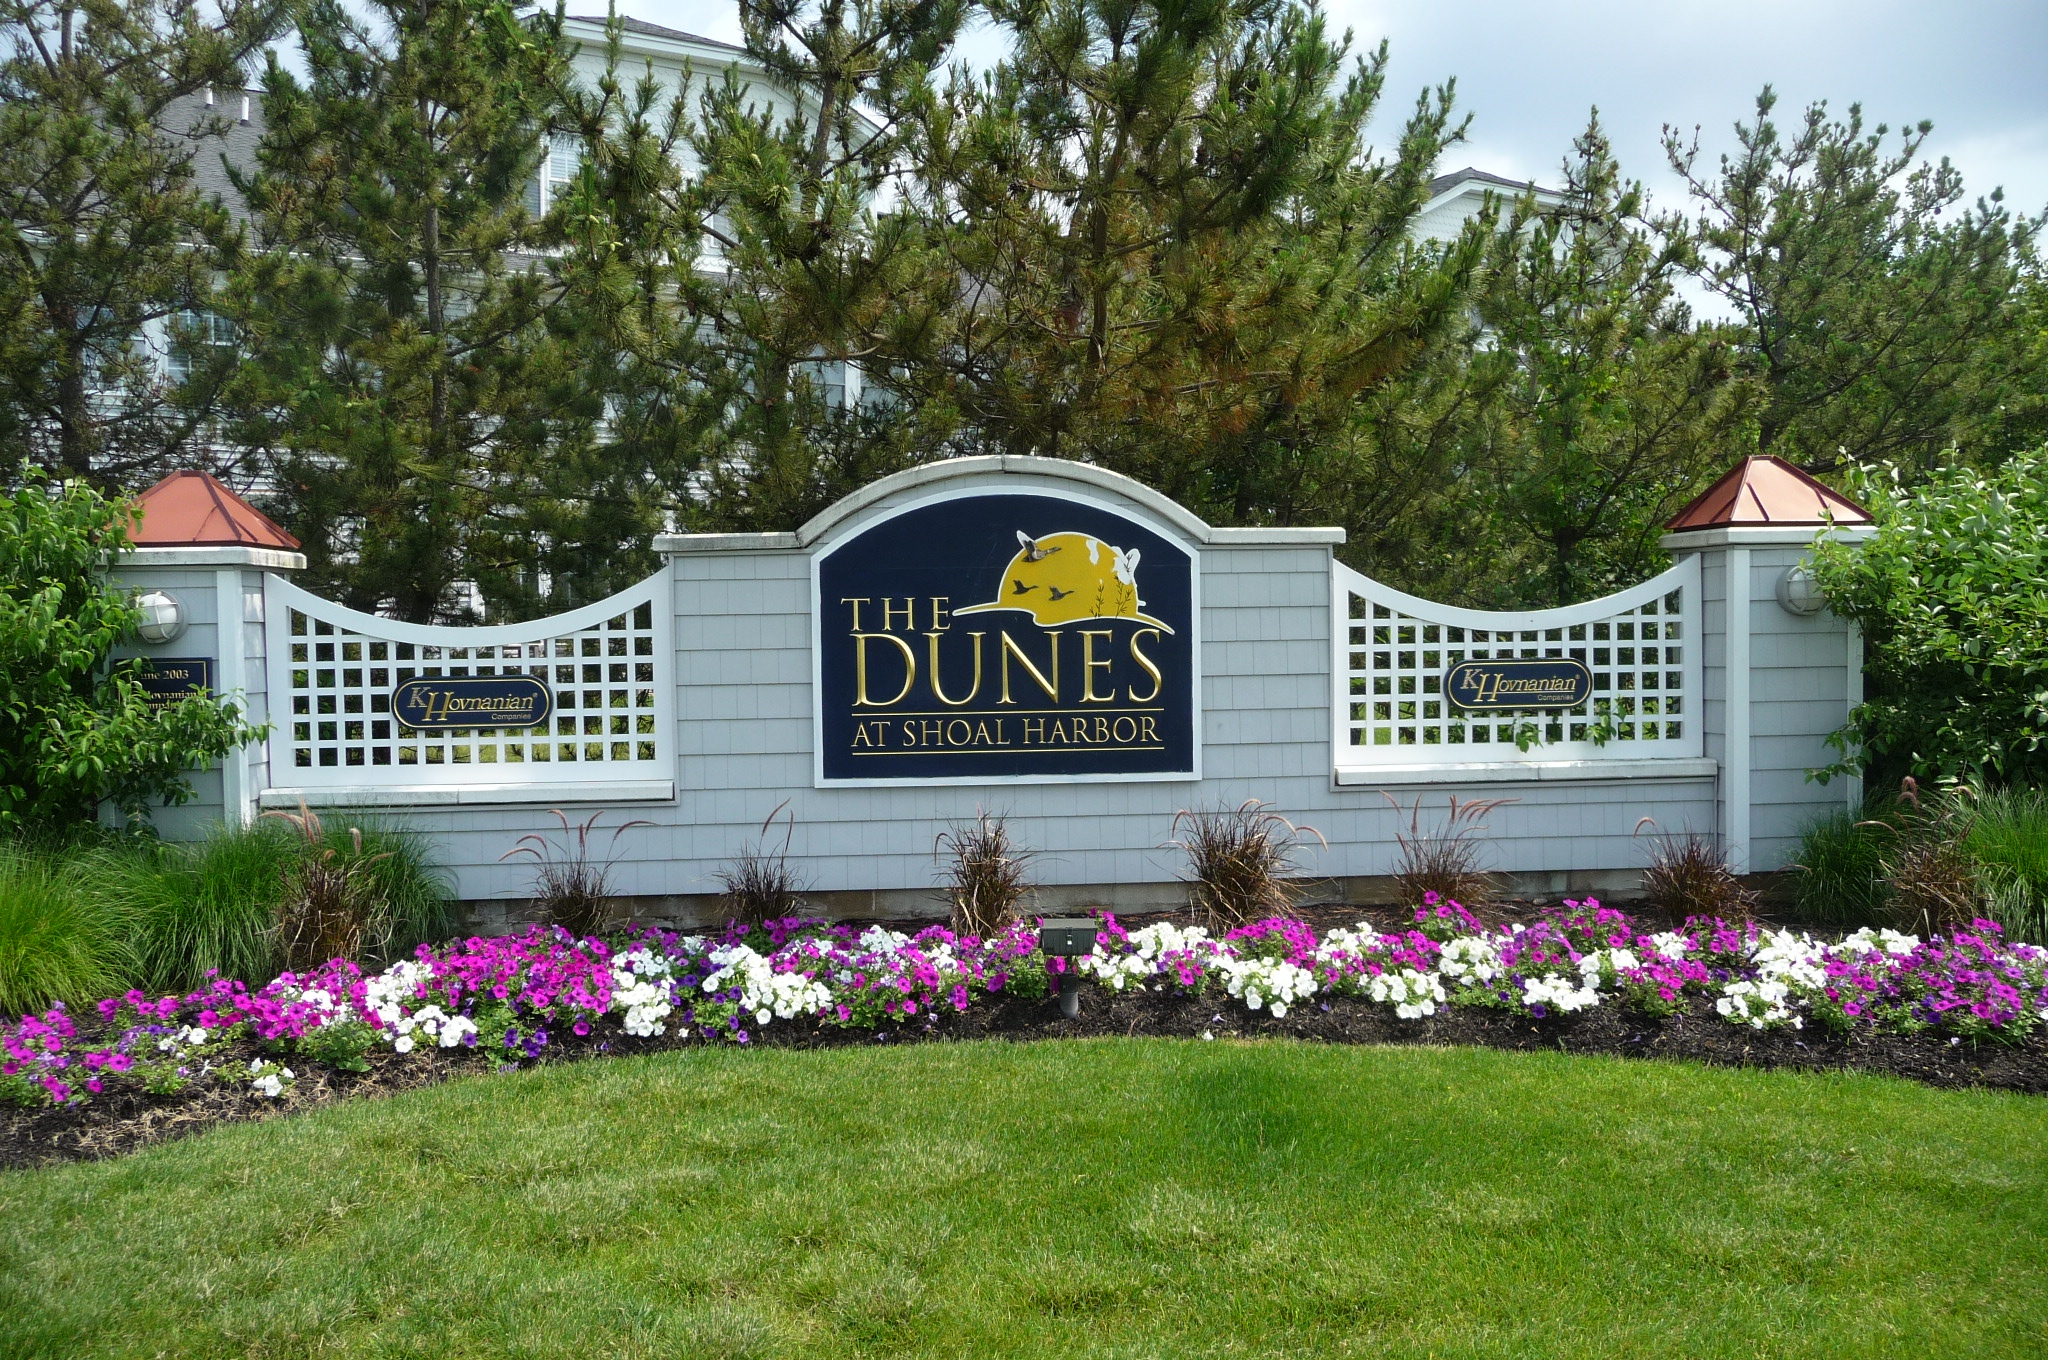 The Dunes at Shoal Harbor, Port Monmouth, NJ